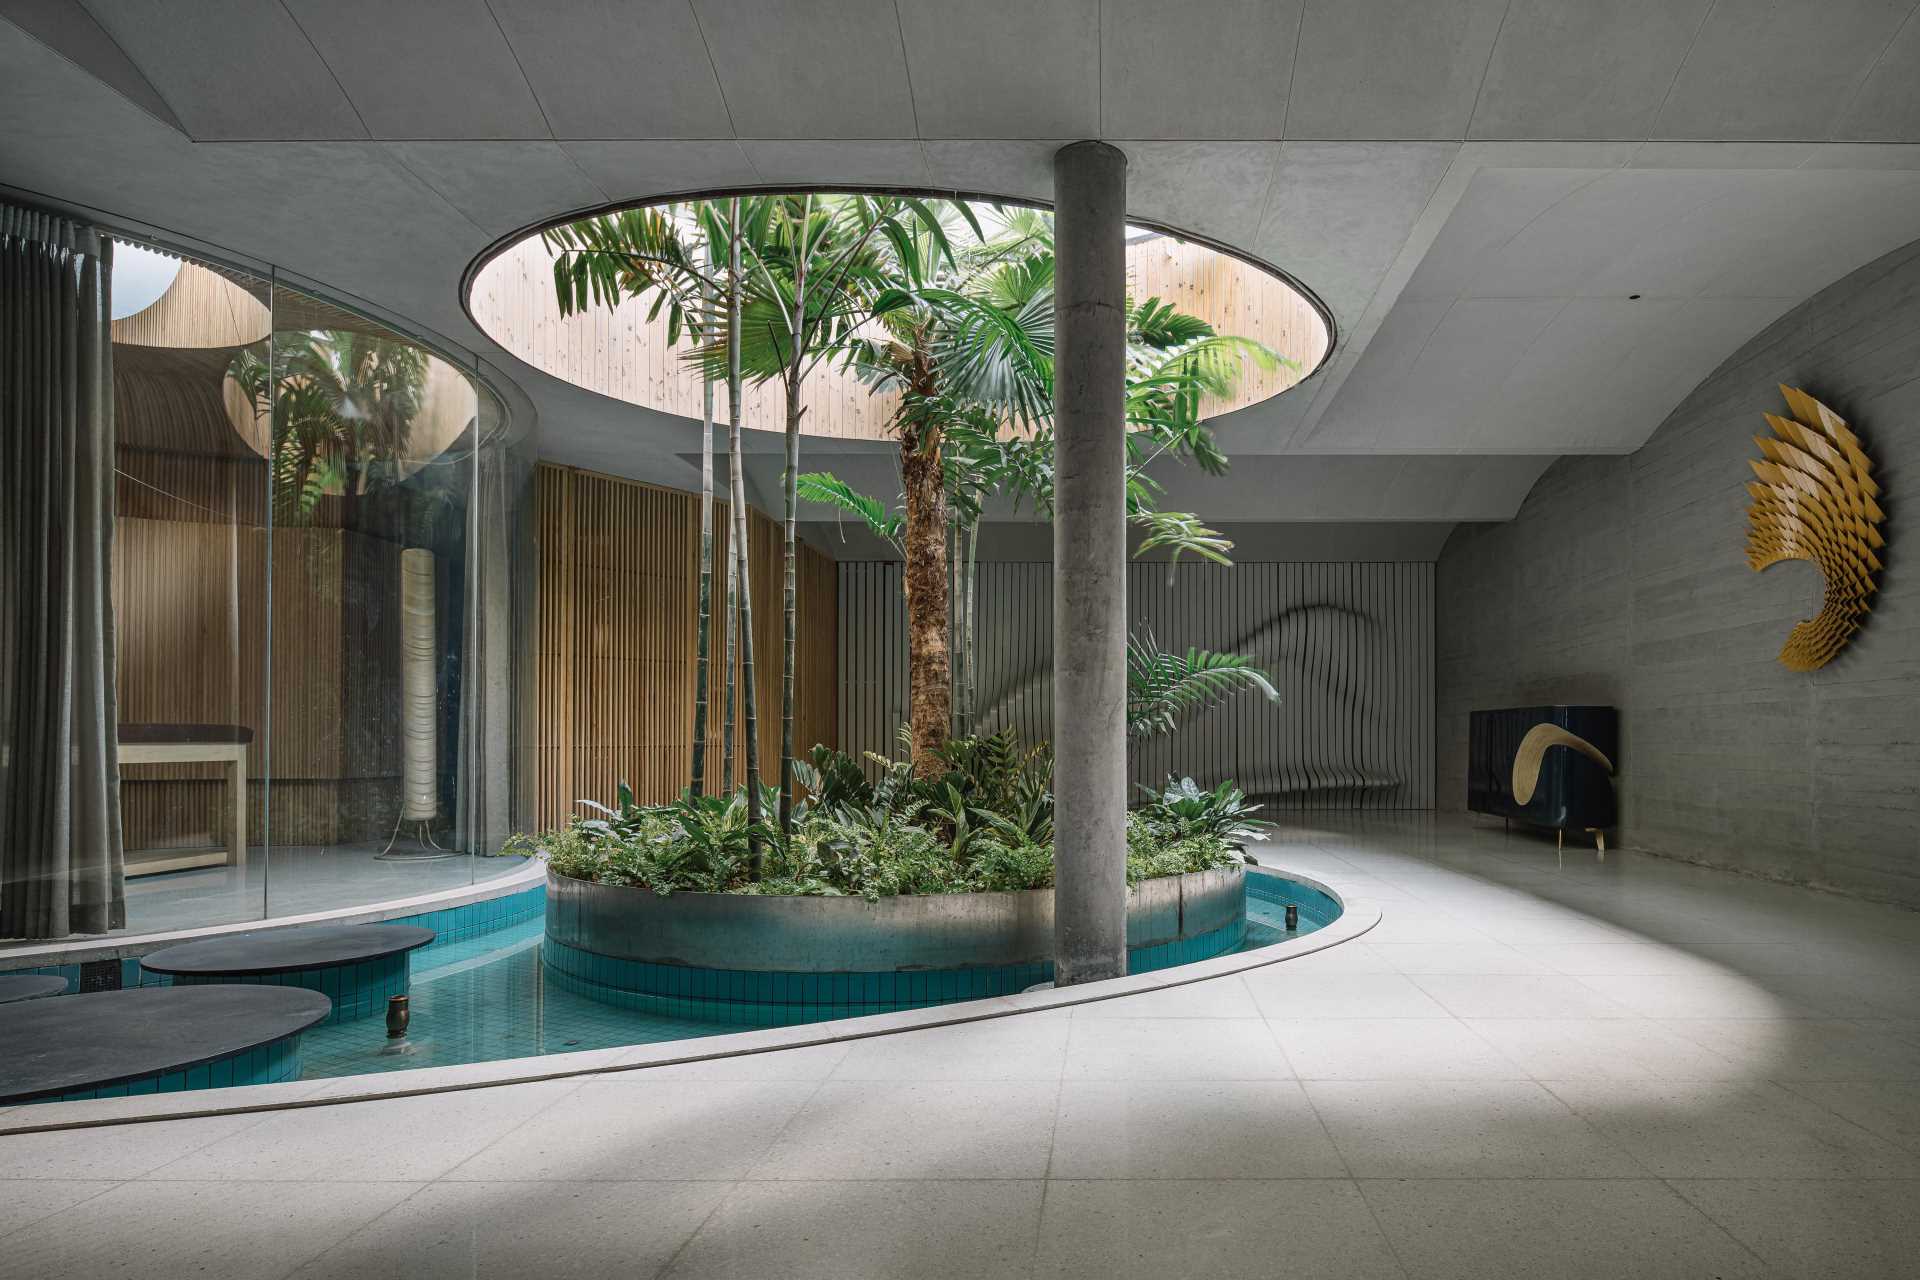 A quiet area of this modern ،me includes a m،age room, a water feature with a garden island, and a sculptural wall.